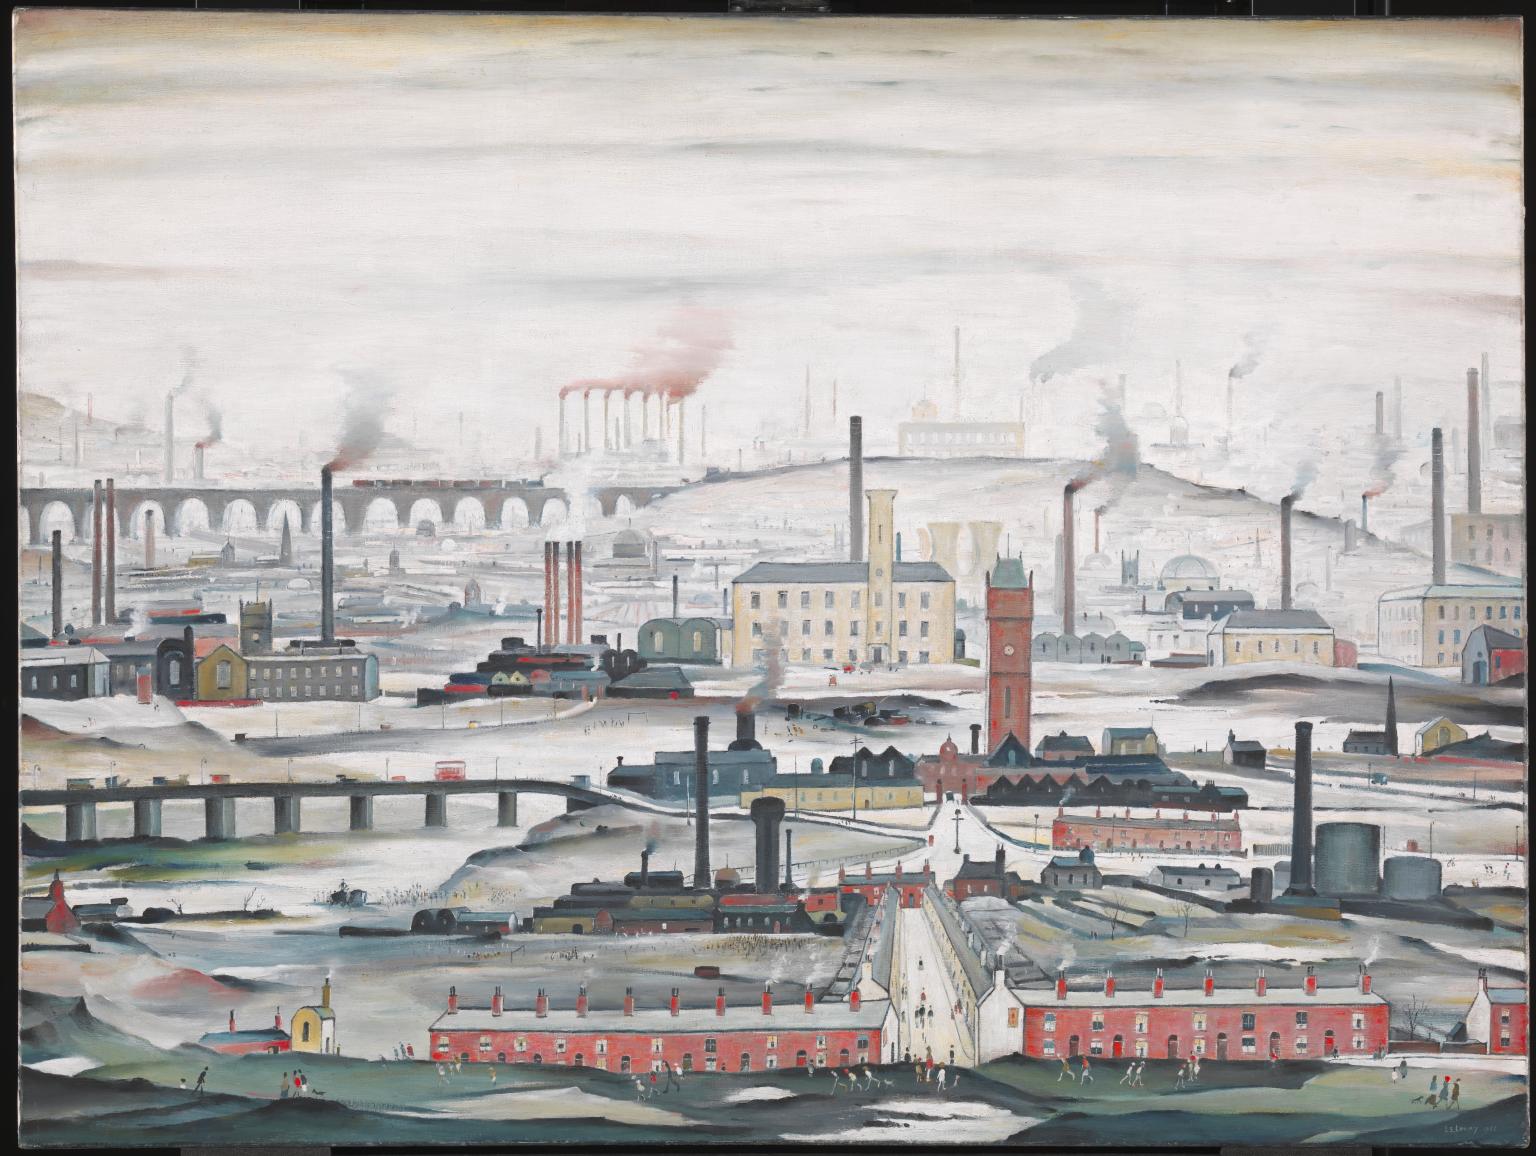 ‘Industrial Landscape’ (1955) - widely recognised as the most famous themes in Lowry's paintings & prints